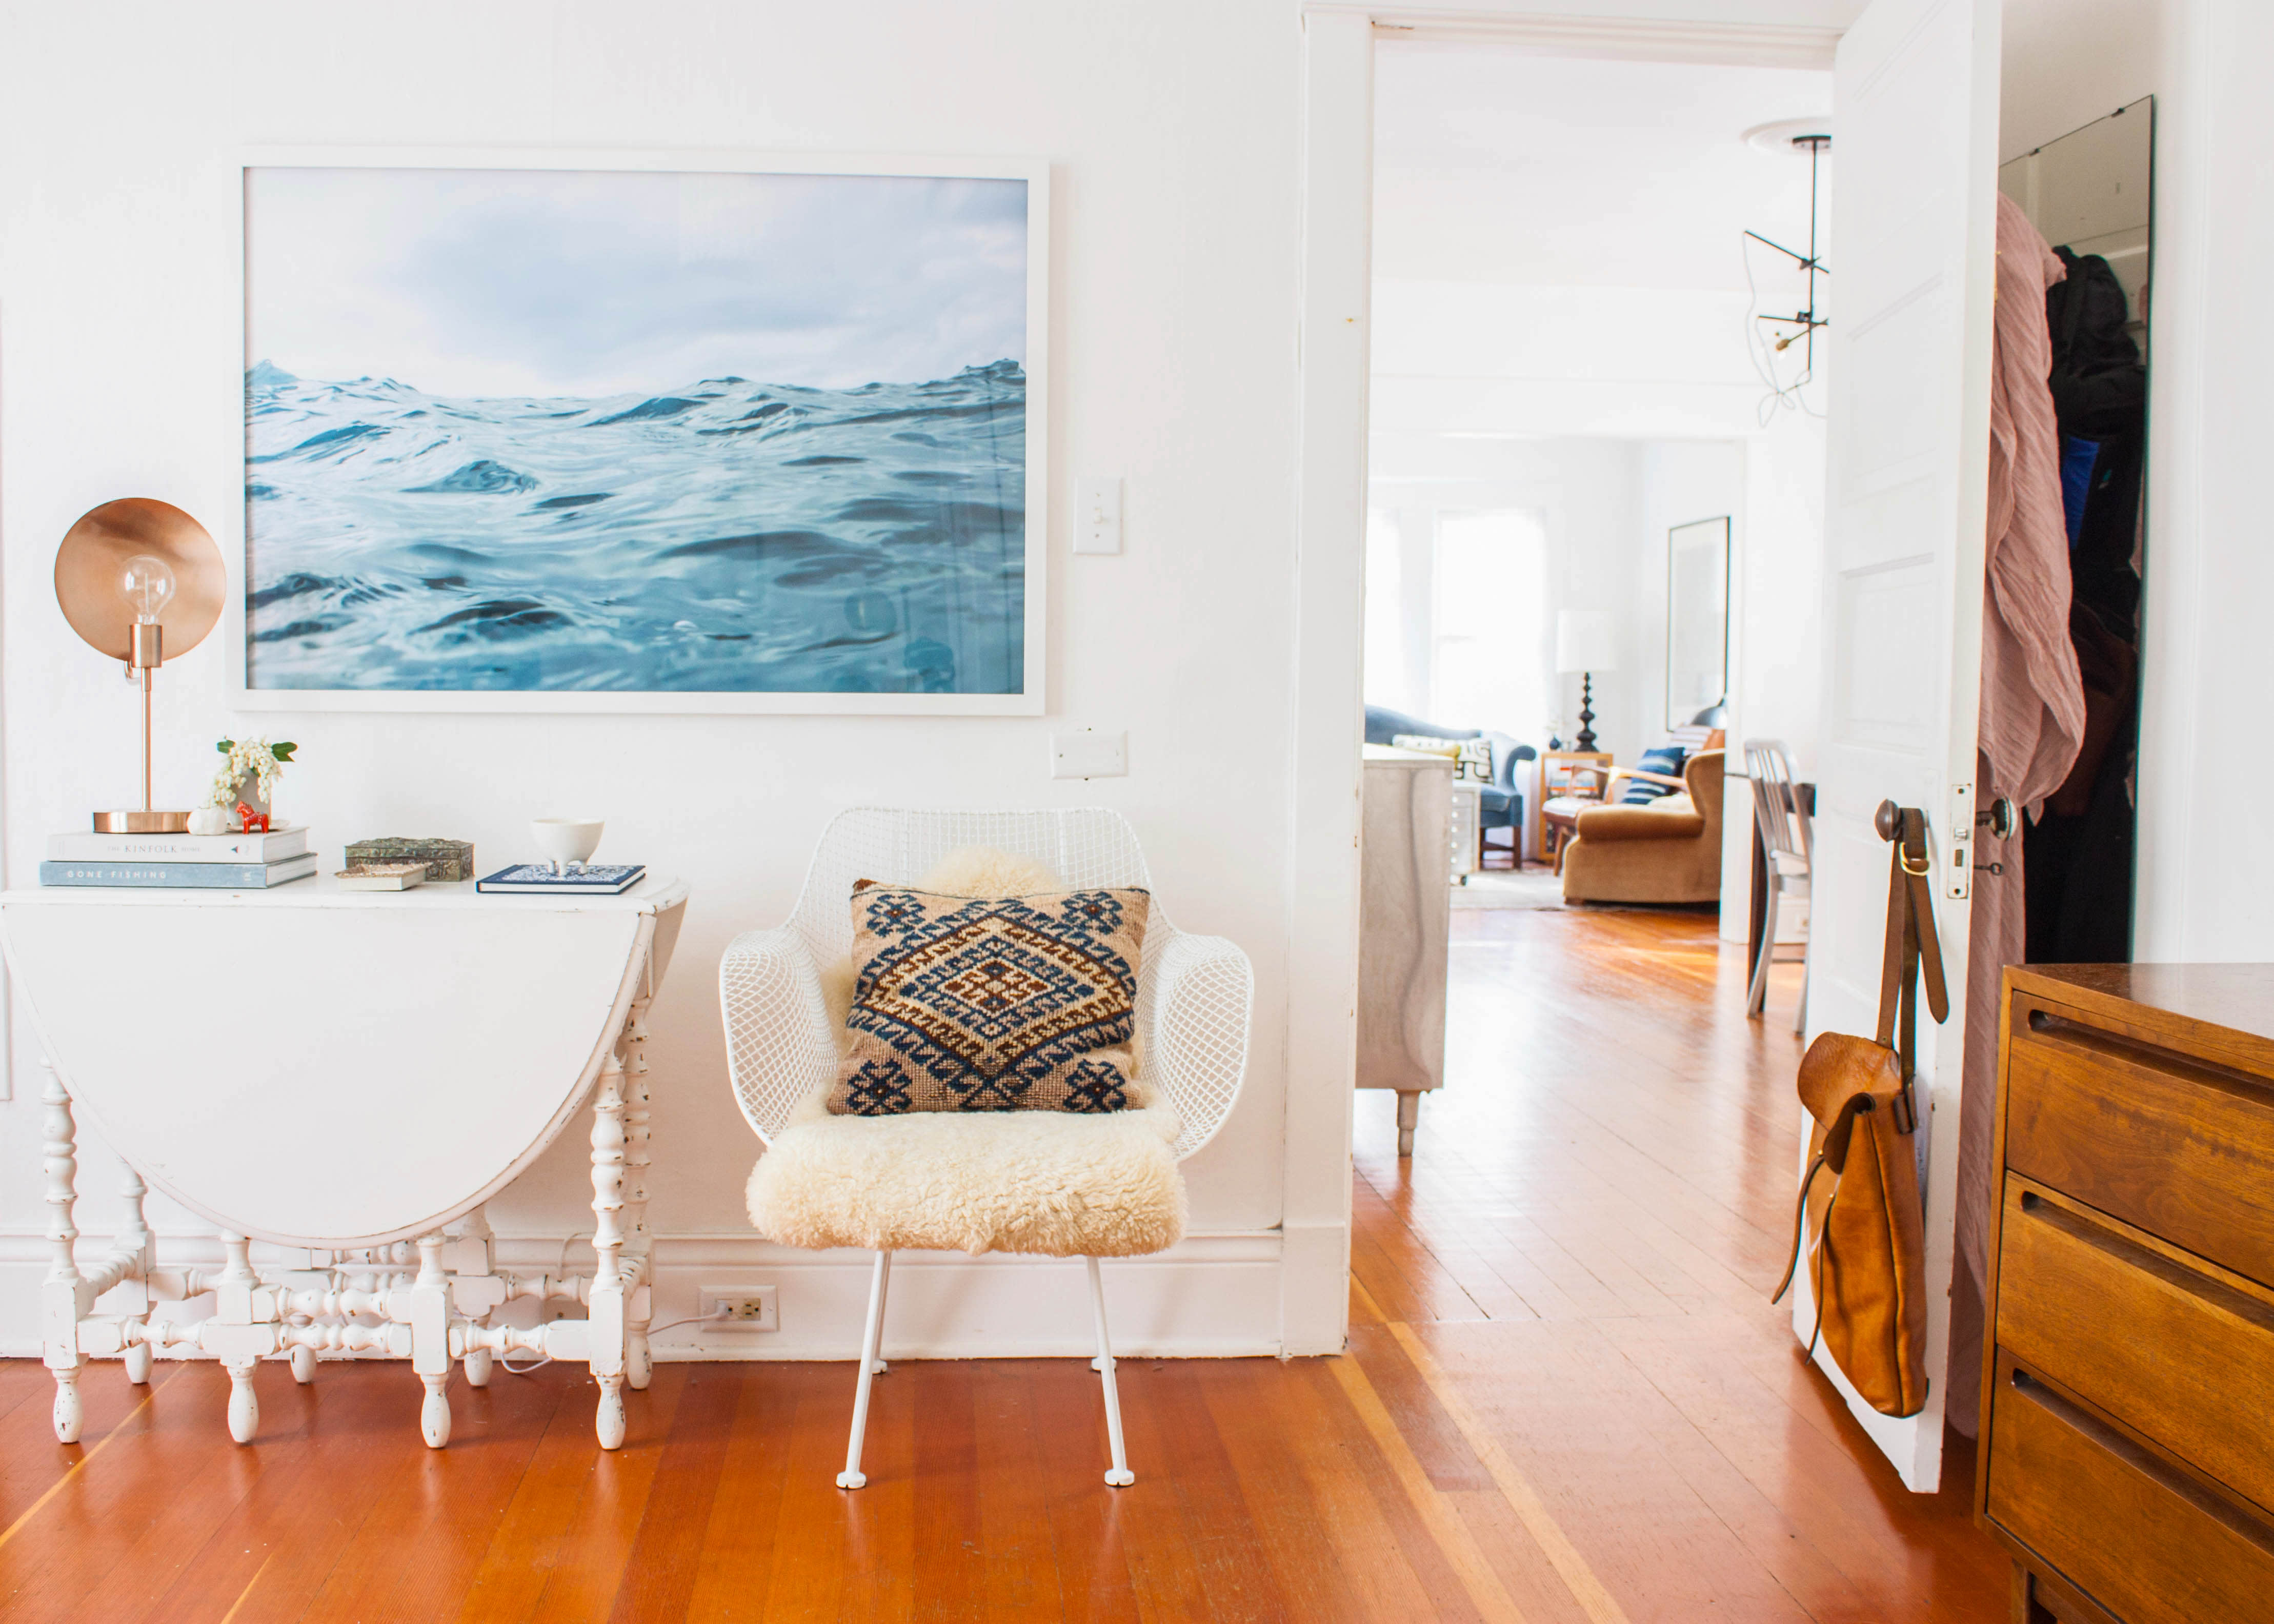 How to Hang Wall Art the Right Way